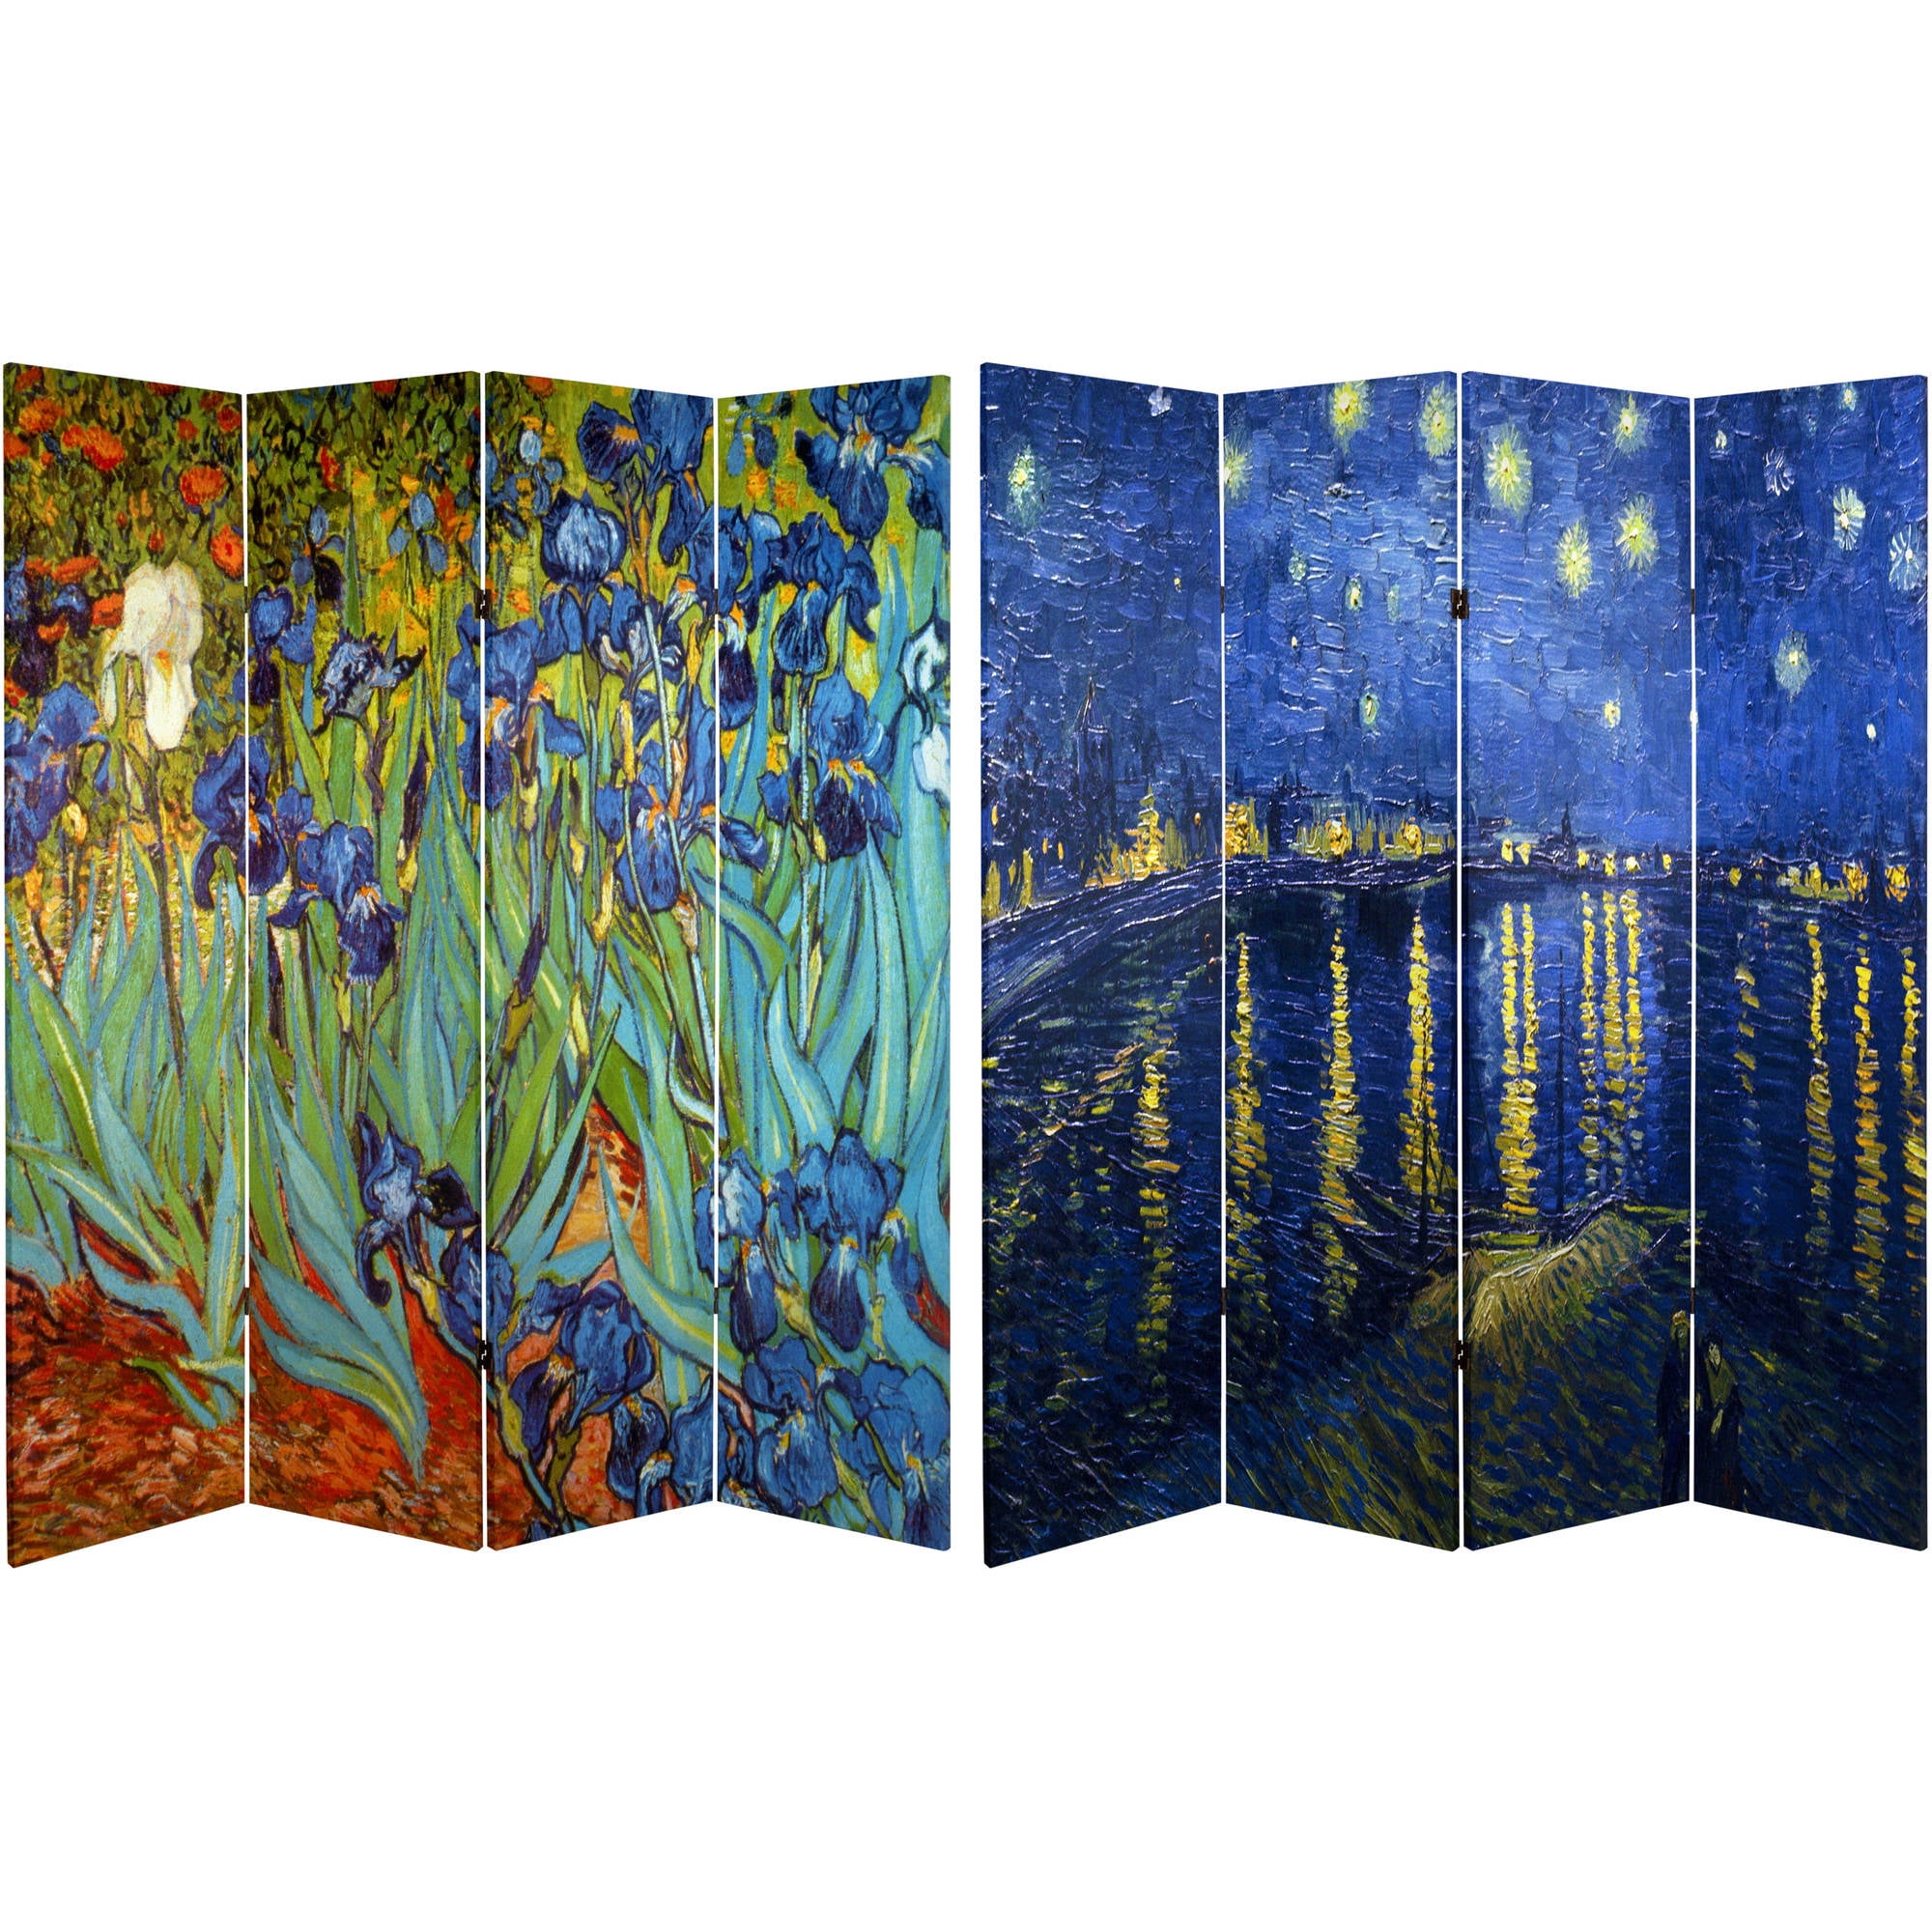 6 ft Tall Double Sided Autumn Woods Canvas Room Divider 